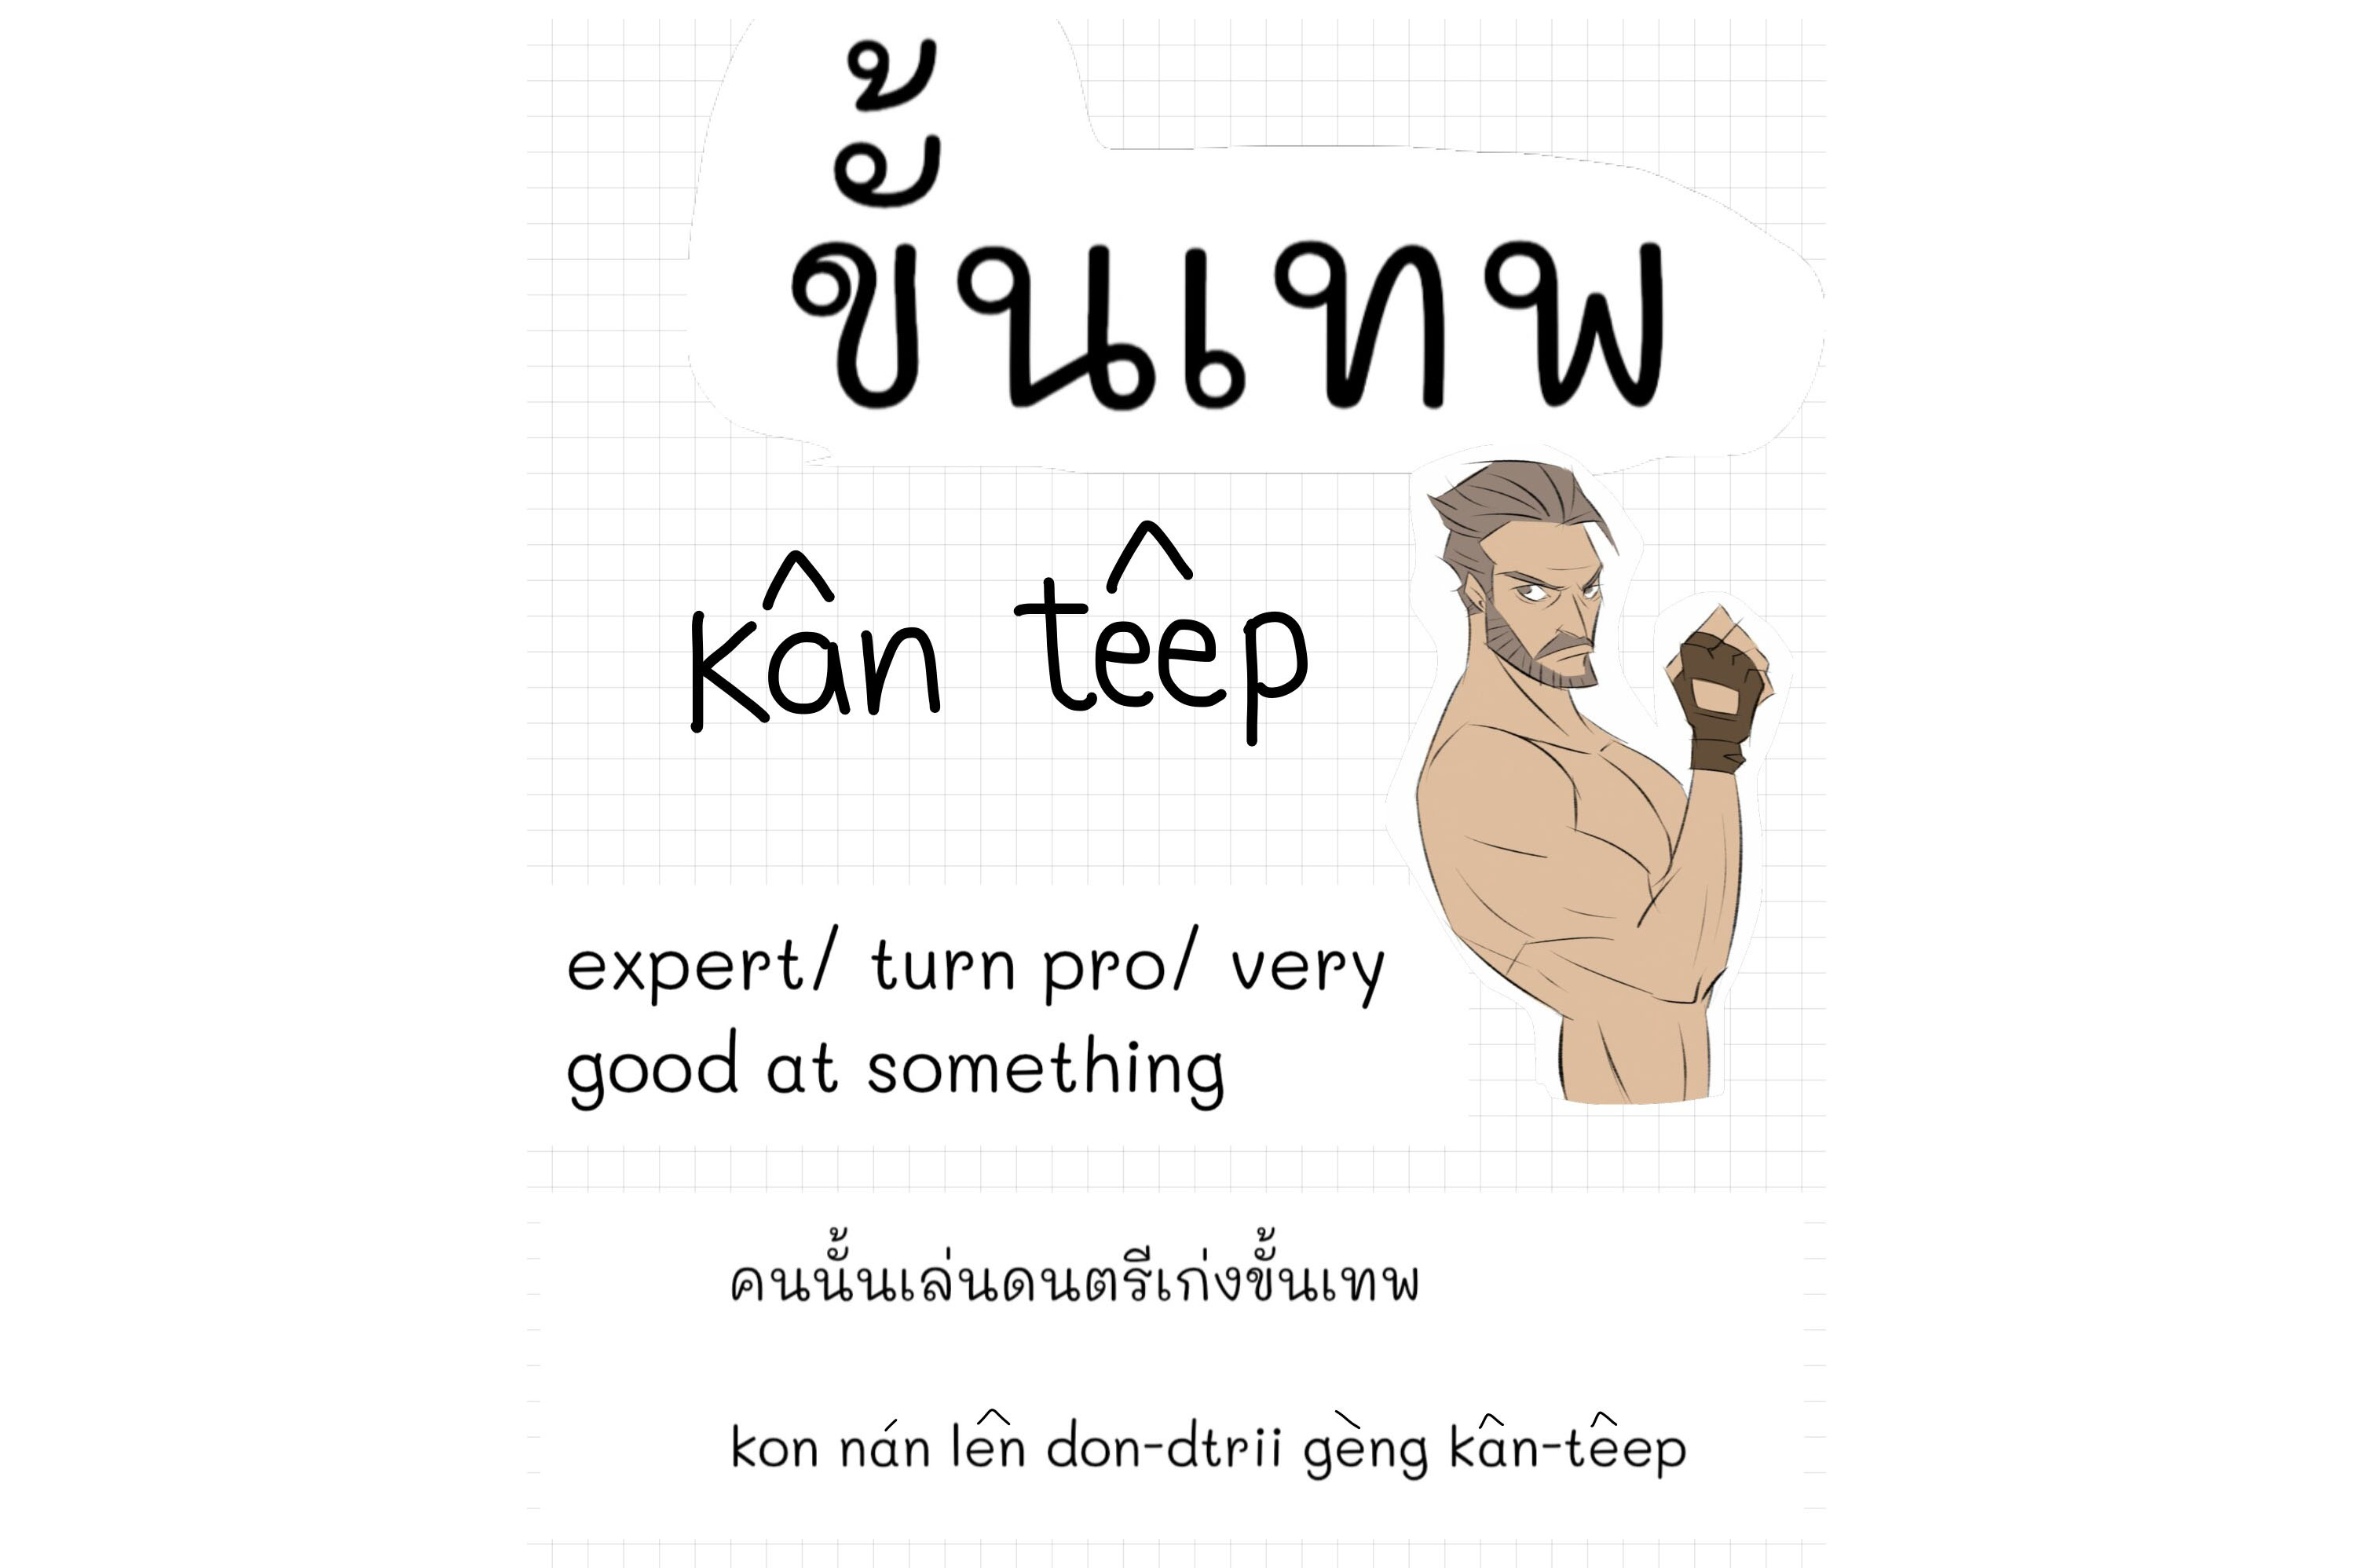 Our Guide to Thai Internet & Text Slang